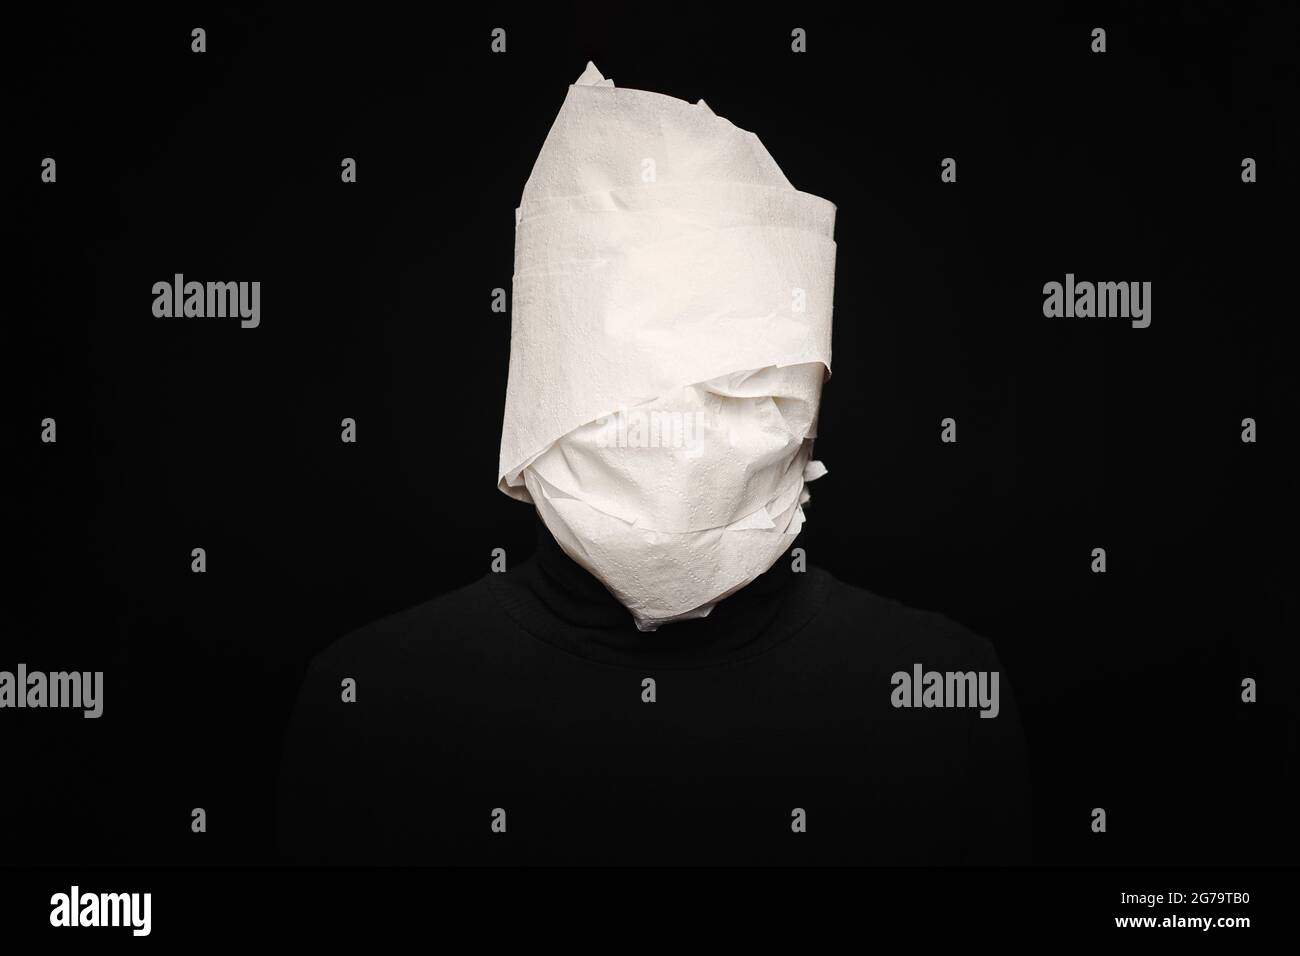 Head wrapped in toilet paper. Funny man, black background. Mummy, stupid dummy, mental health concept. Stock Photo